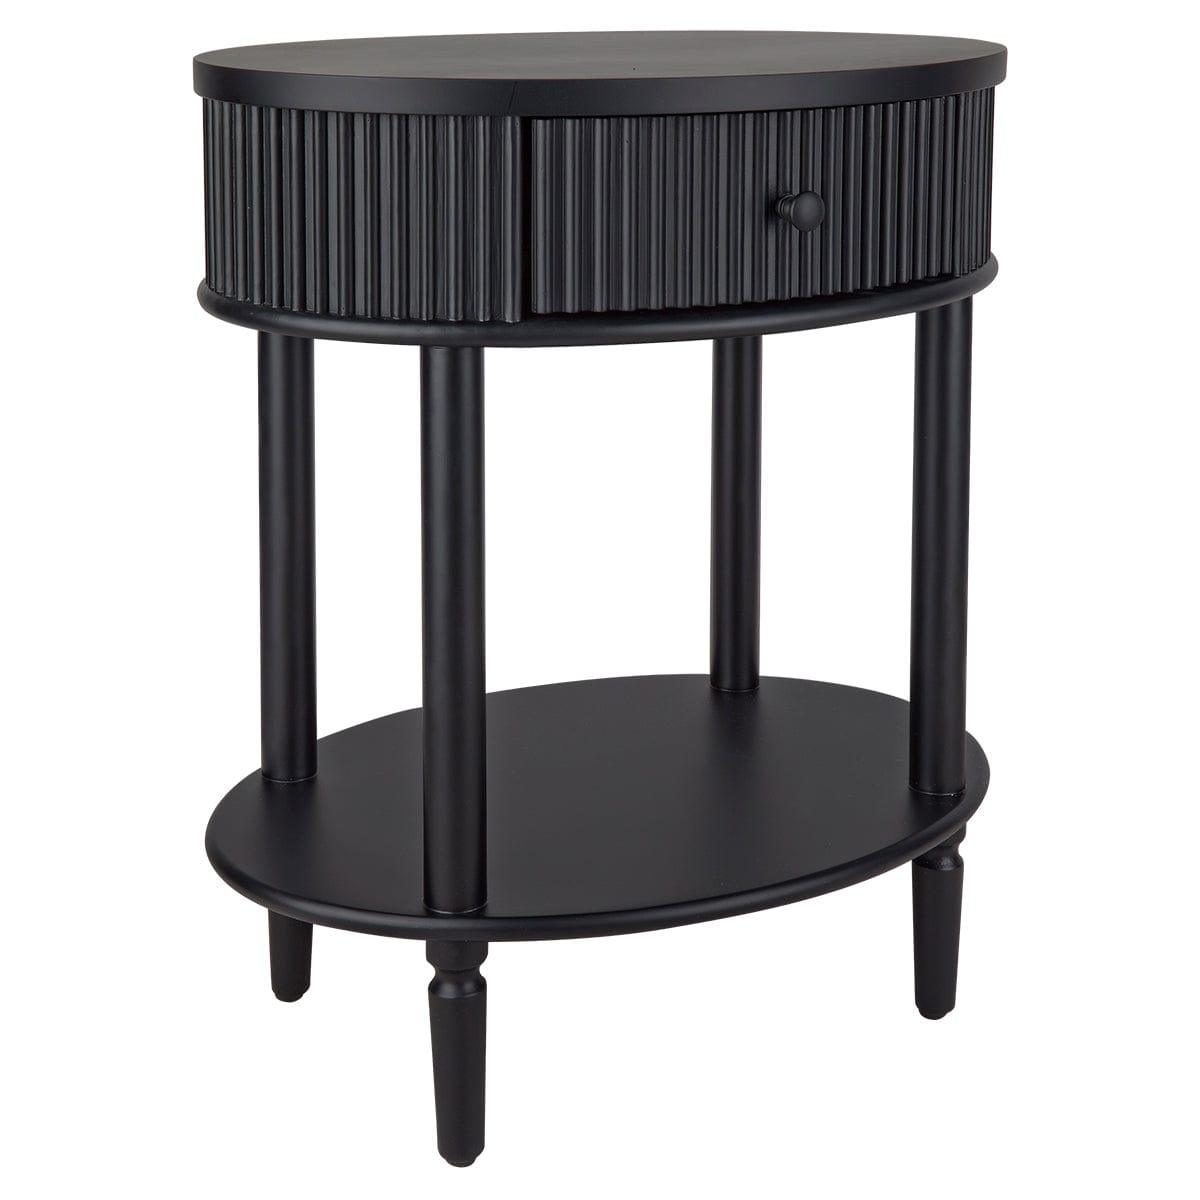 House Journey Arielle Oval Bedside Table - Black